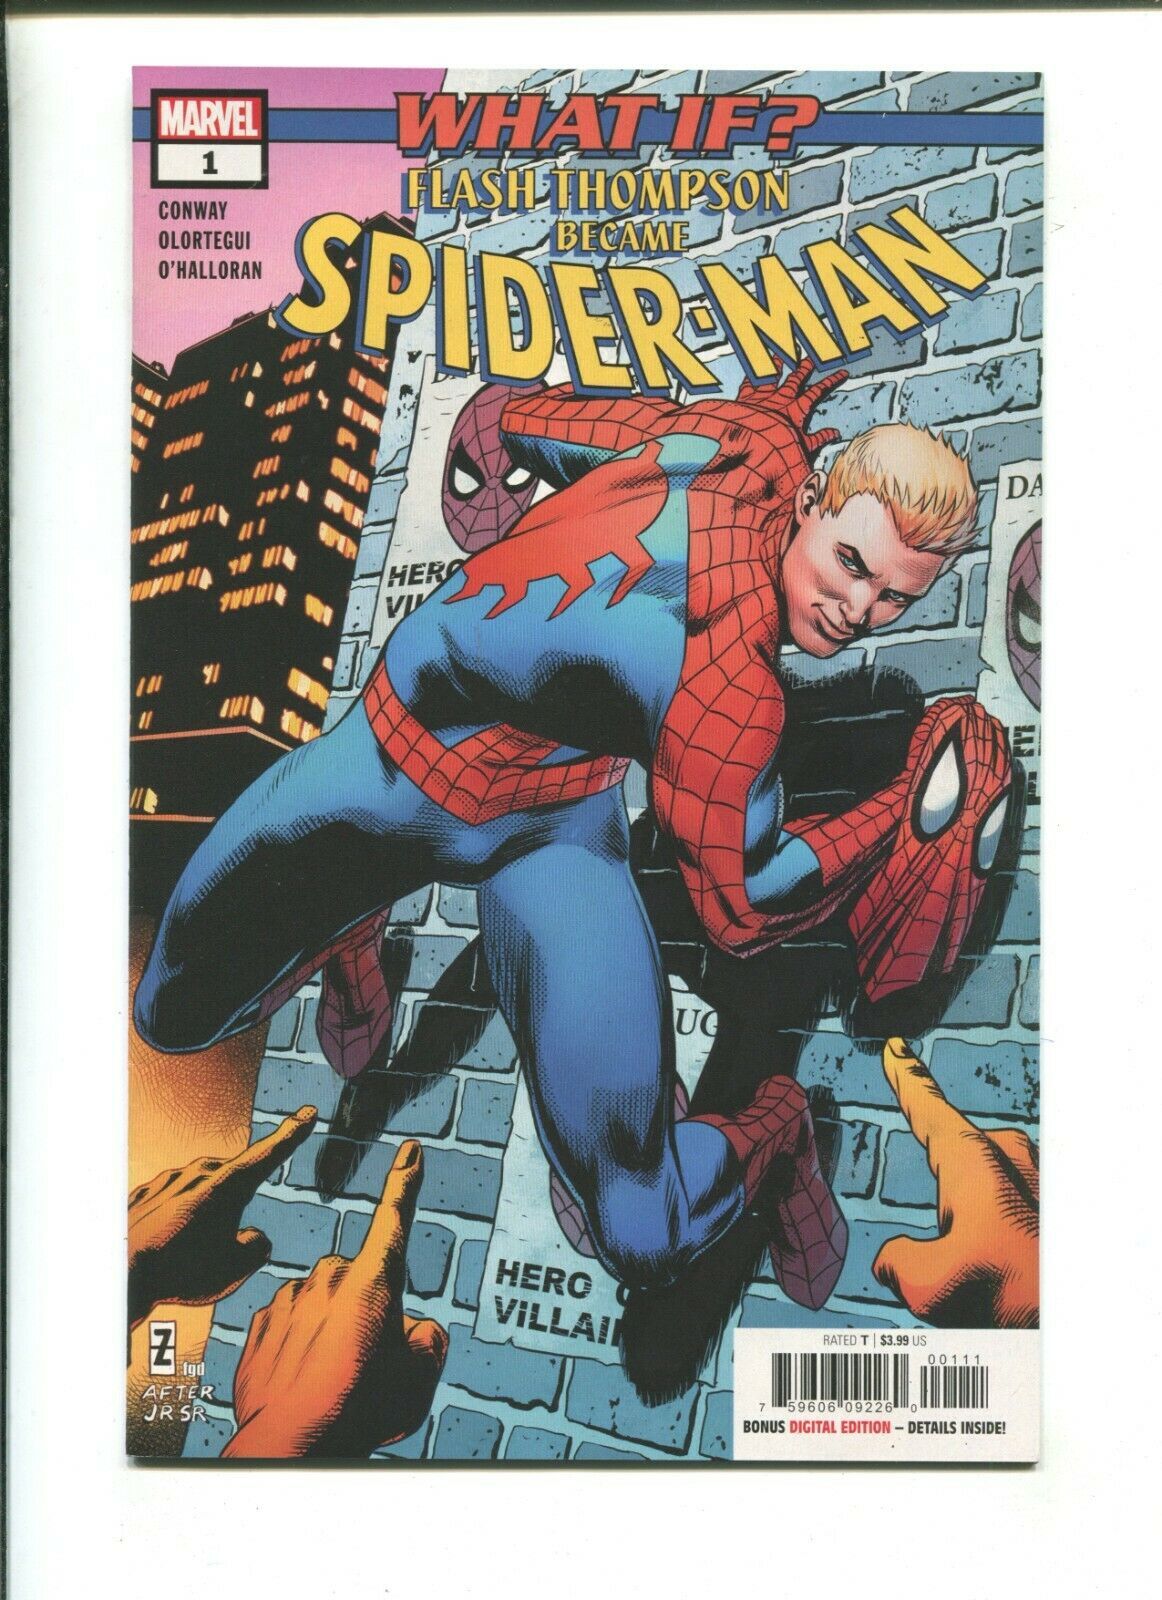 What IF? #1 - Flash Thompson Became Spider-Man () 2018 | Comic Books -  Modern Age, Marvel, Spider-Man / HipComic